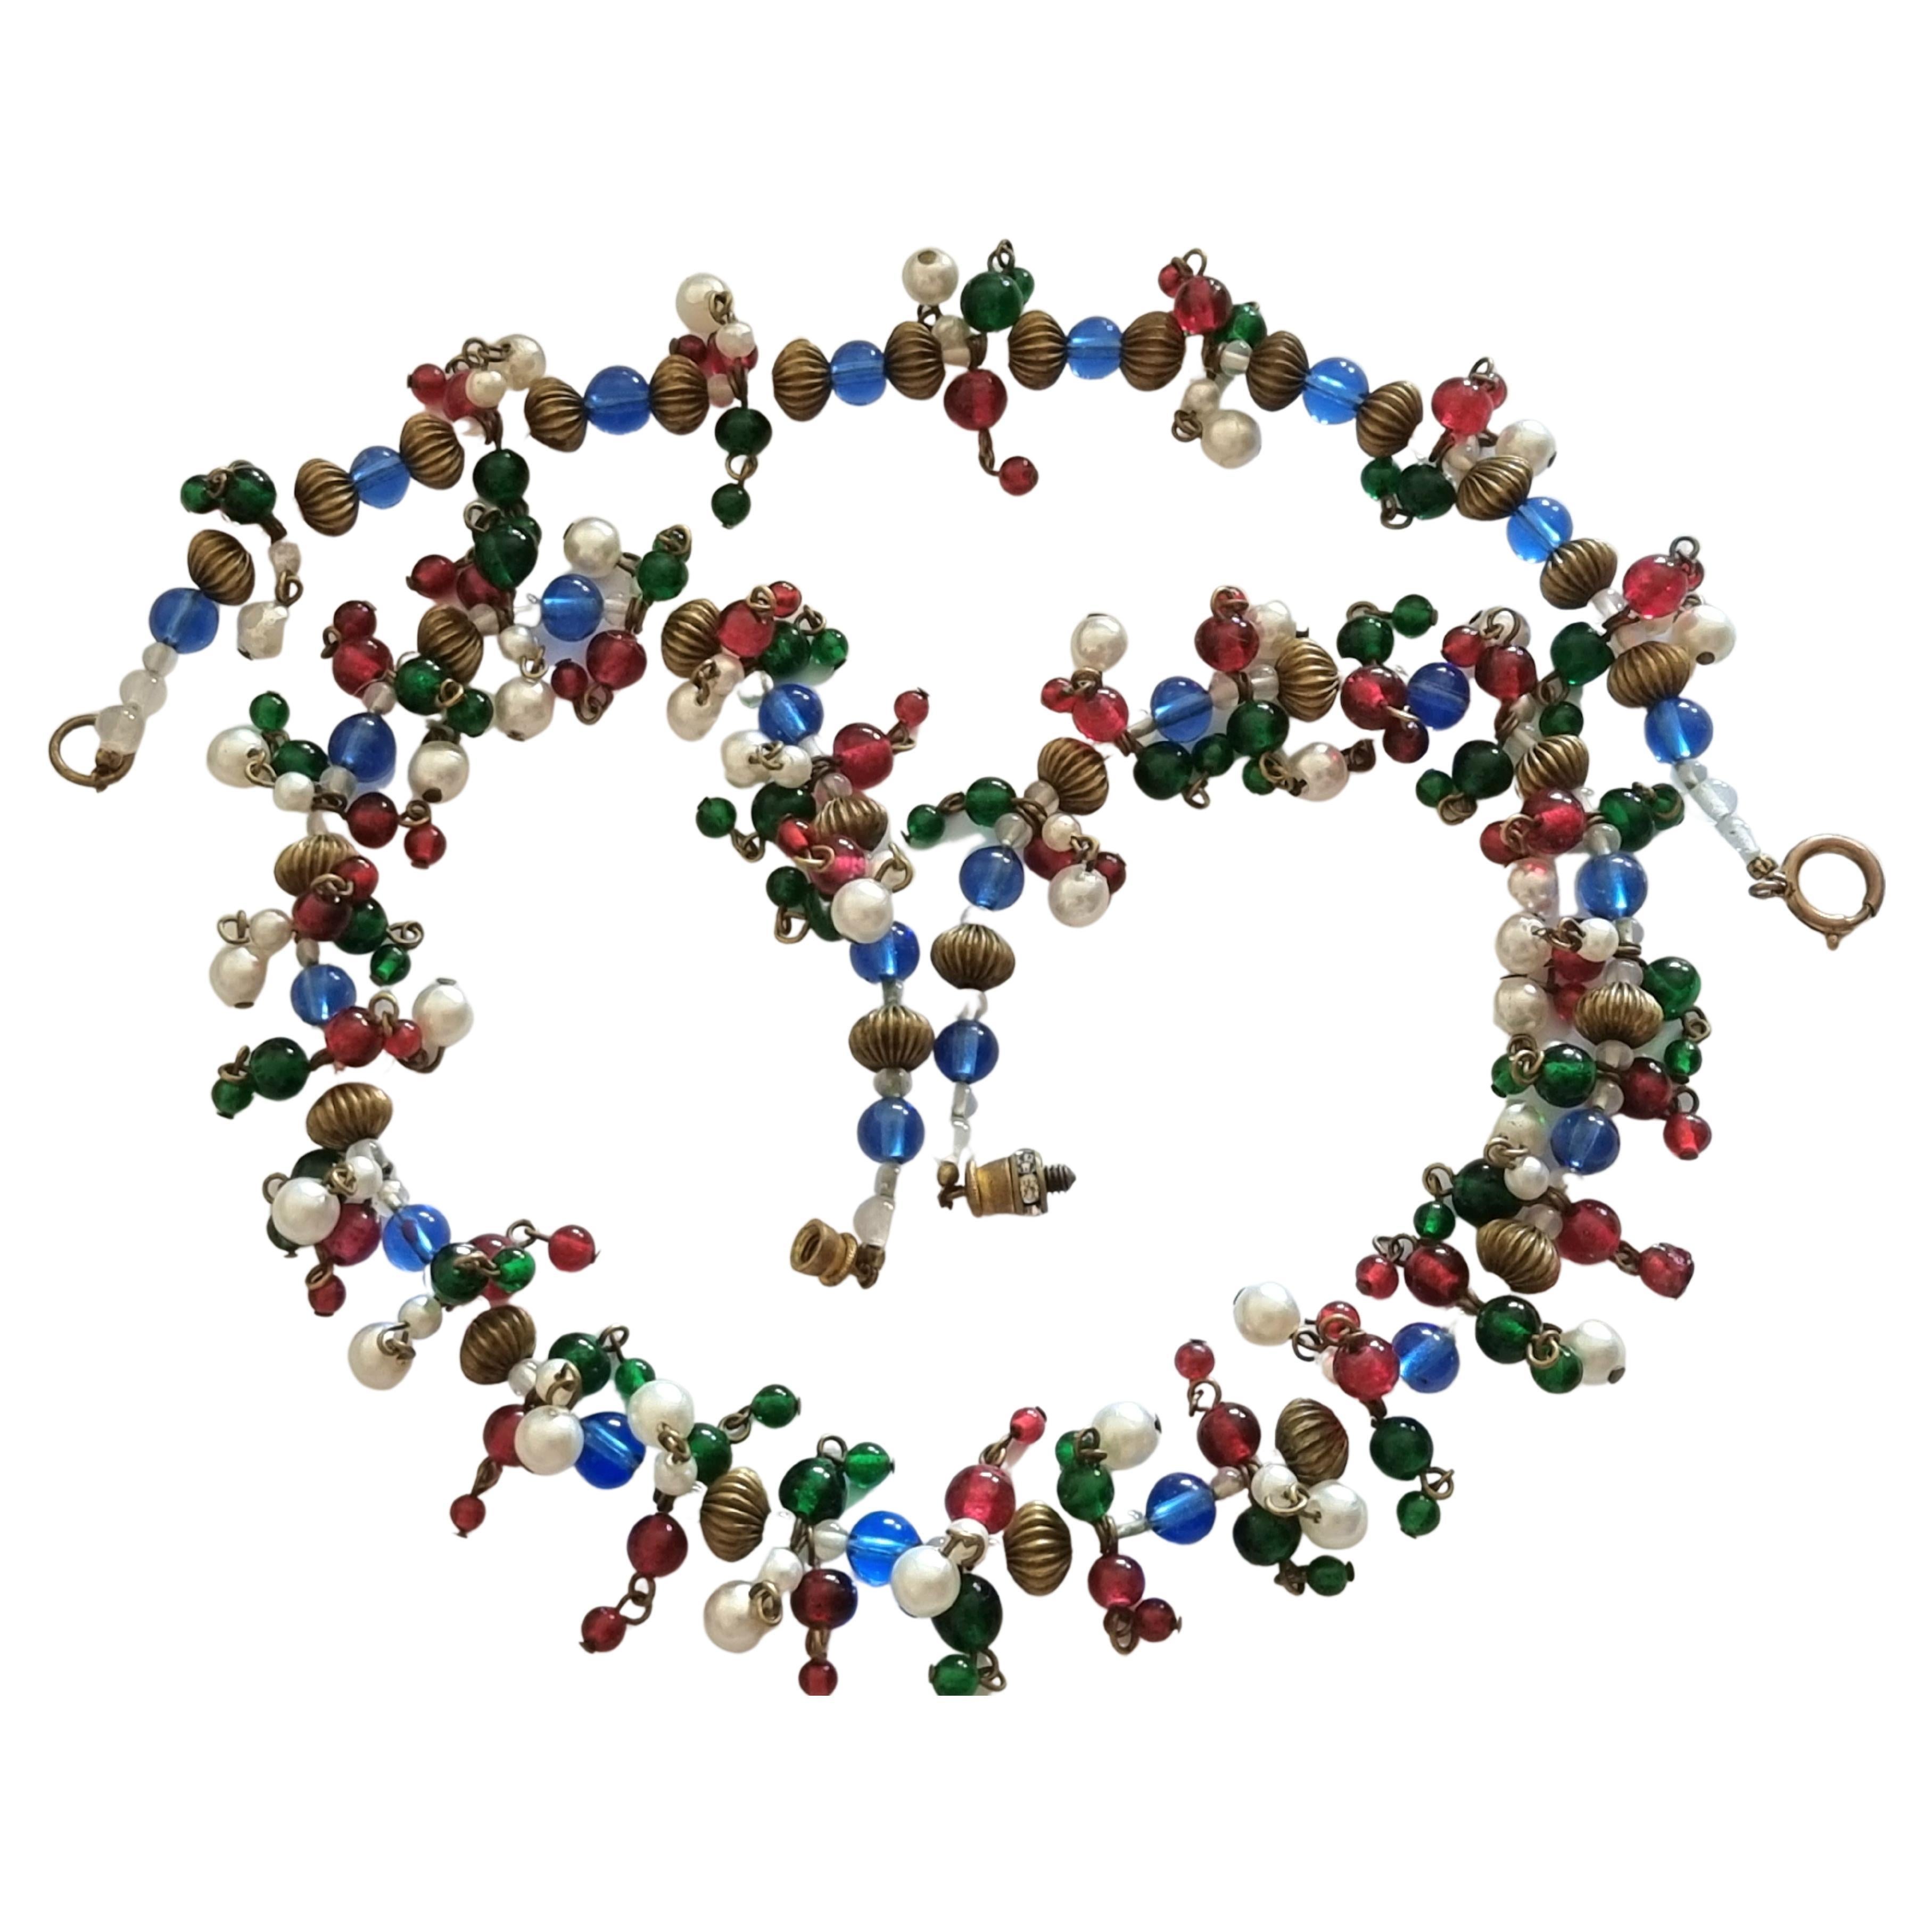 CHANEL GRIPOIX 1950, NECKLACE and BRACELET, gadrooned gilt beads, Gripoix glass For Sale